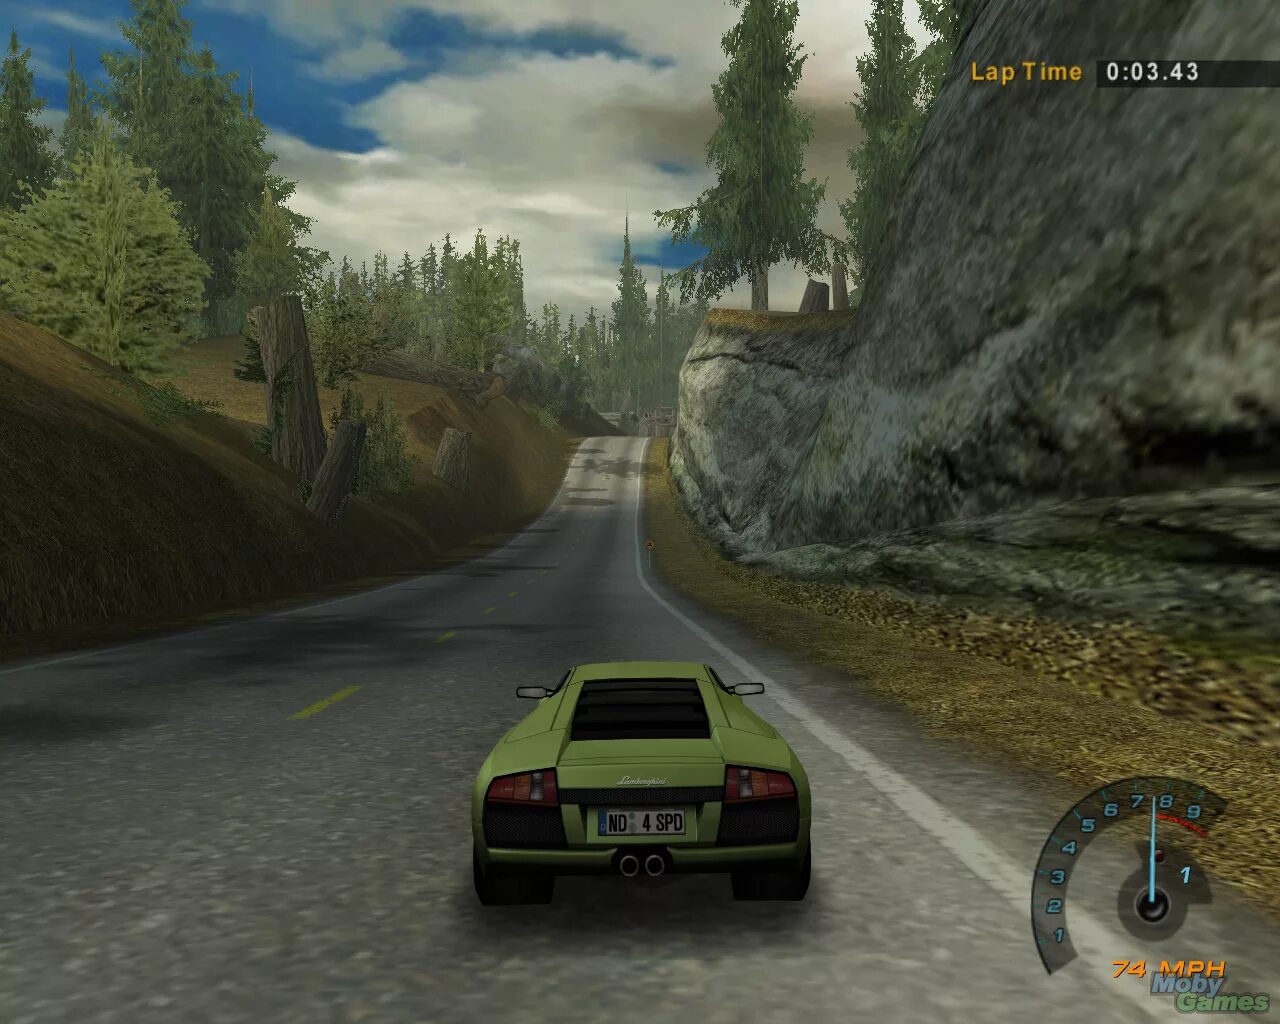 Need for Speed hot Pursuit 2. NFS 3 hot Pursuit 2. Need for Speed hot Pursuit 2002. Need for Speed hot Pursuit 2 2002.